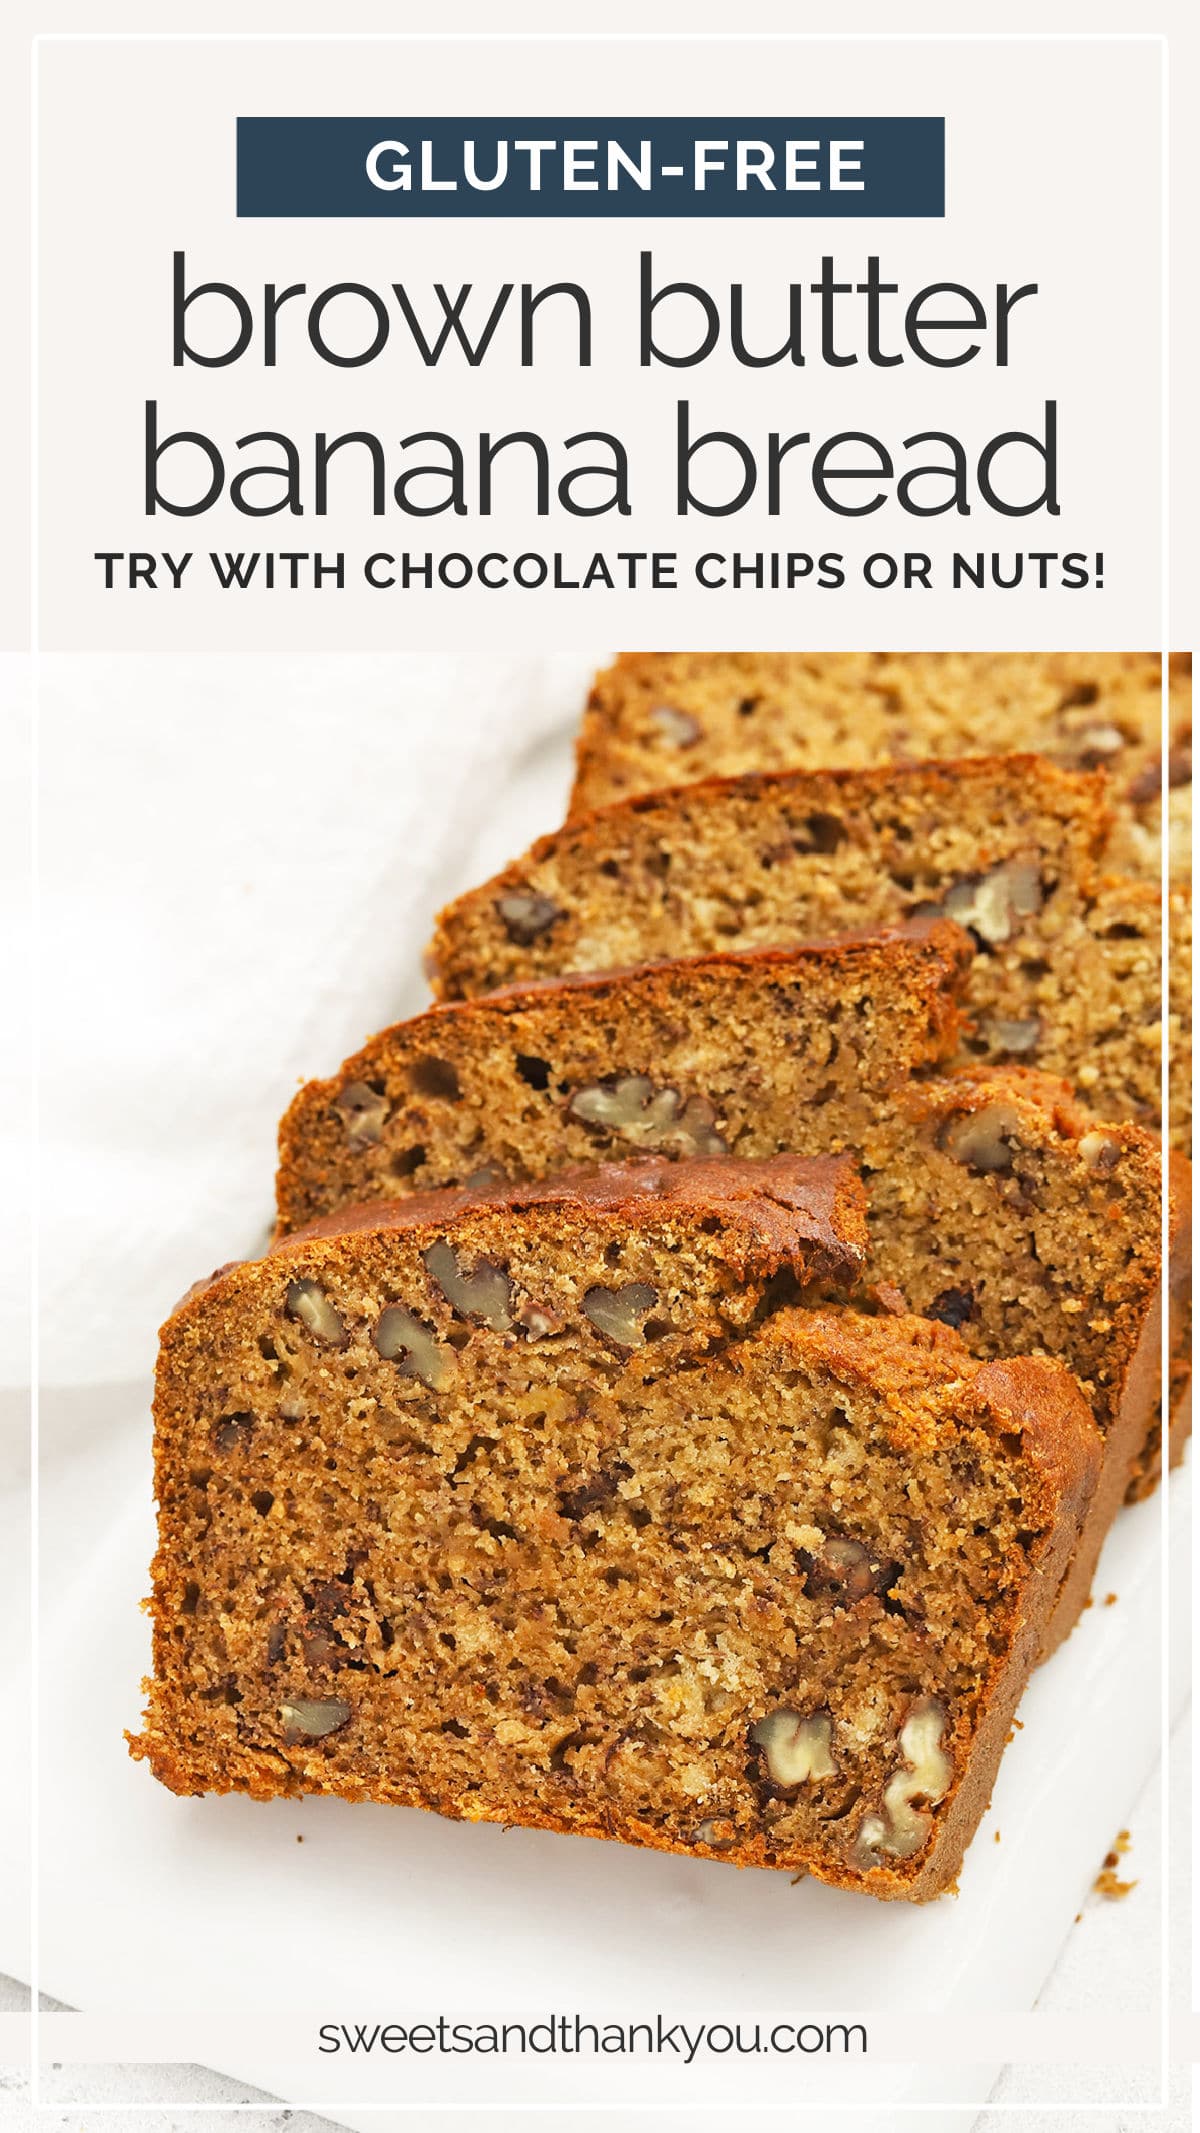 Gluten-Free Brown Butter Banana Bread - This amazing gluten-free banana bread recipe gives you tender, delicious banana bread every time. Laced with caramel-y flavors, it's delicious on its own, with nuts, or chocolate chips! // Brown Butter Banana Bread Recipe // Gluten Free Banana Bread // Sweets And Thank You Banana Bread Recipe // Gluten Free Browned Butter Banana Bread